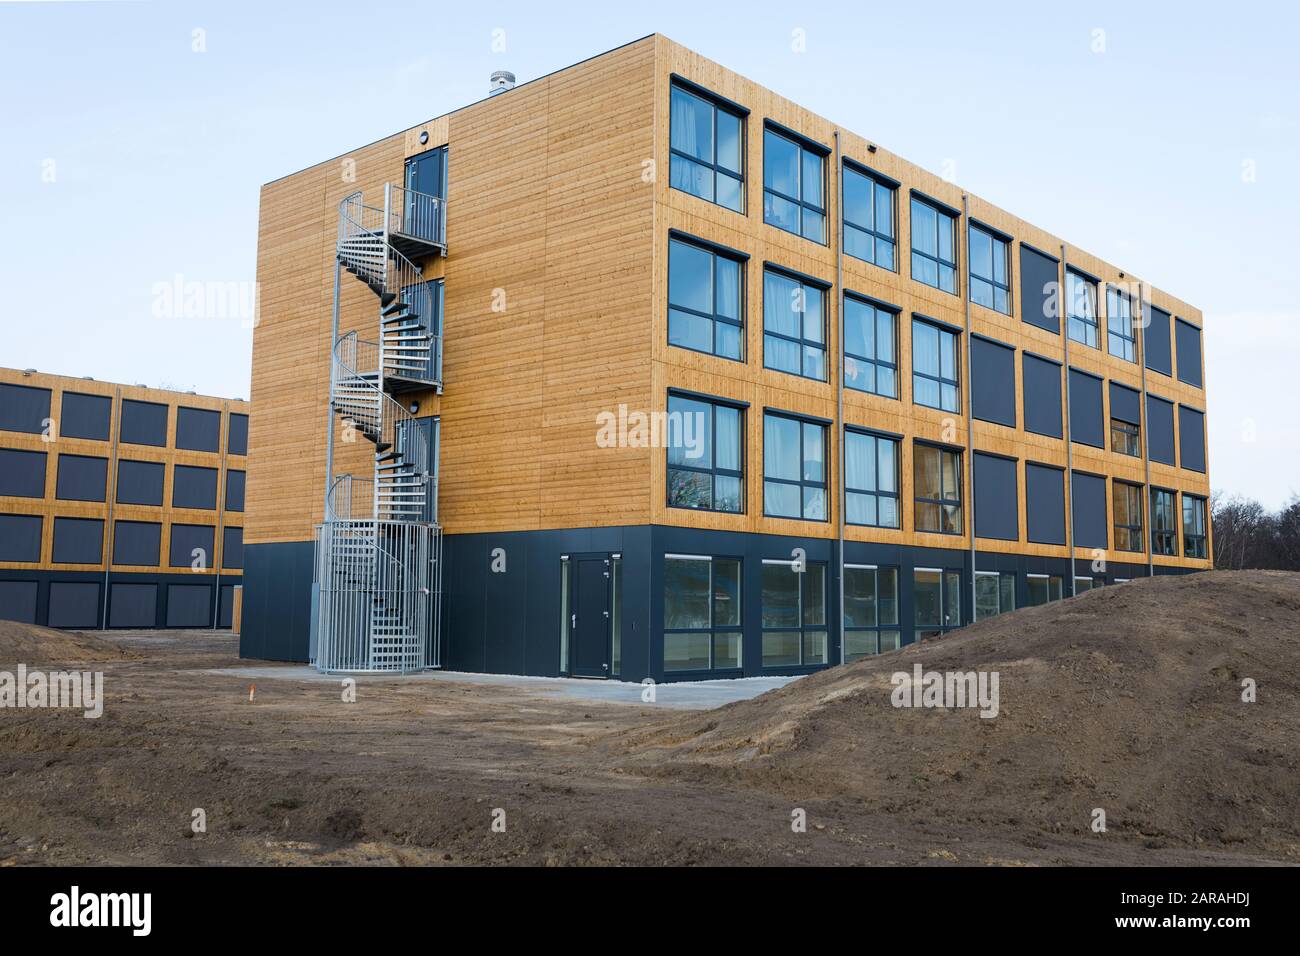 New prefab sustainable apartments for students in Eindhoven, the Netherlands Stock Photo